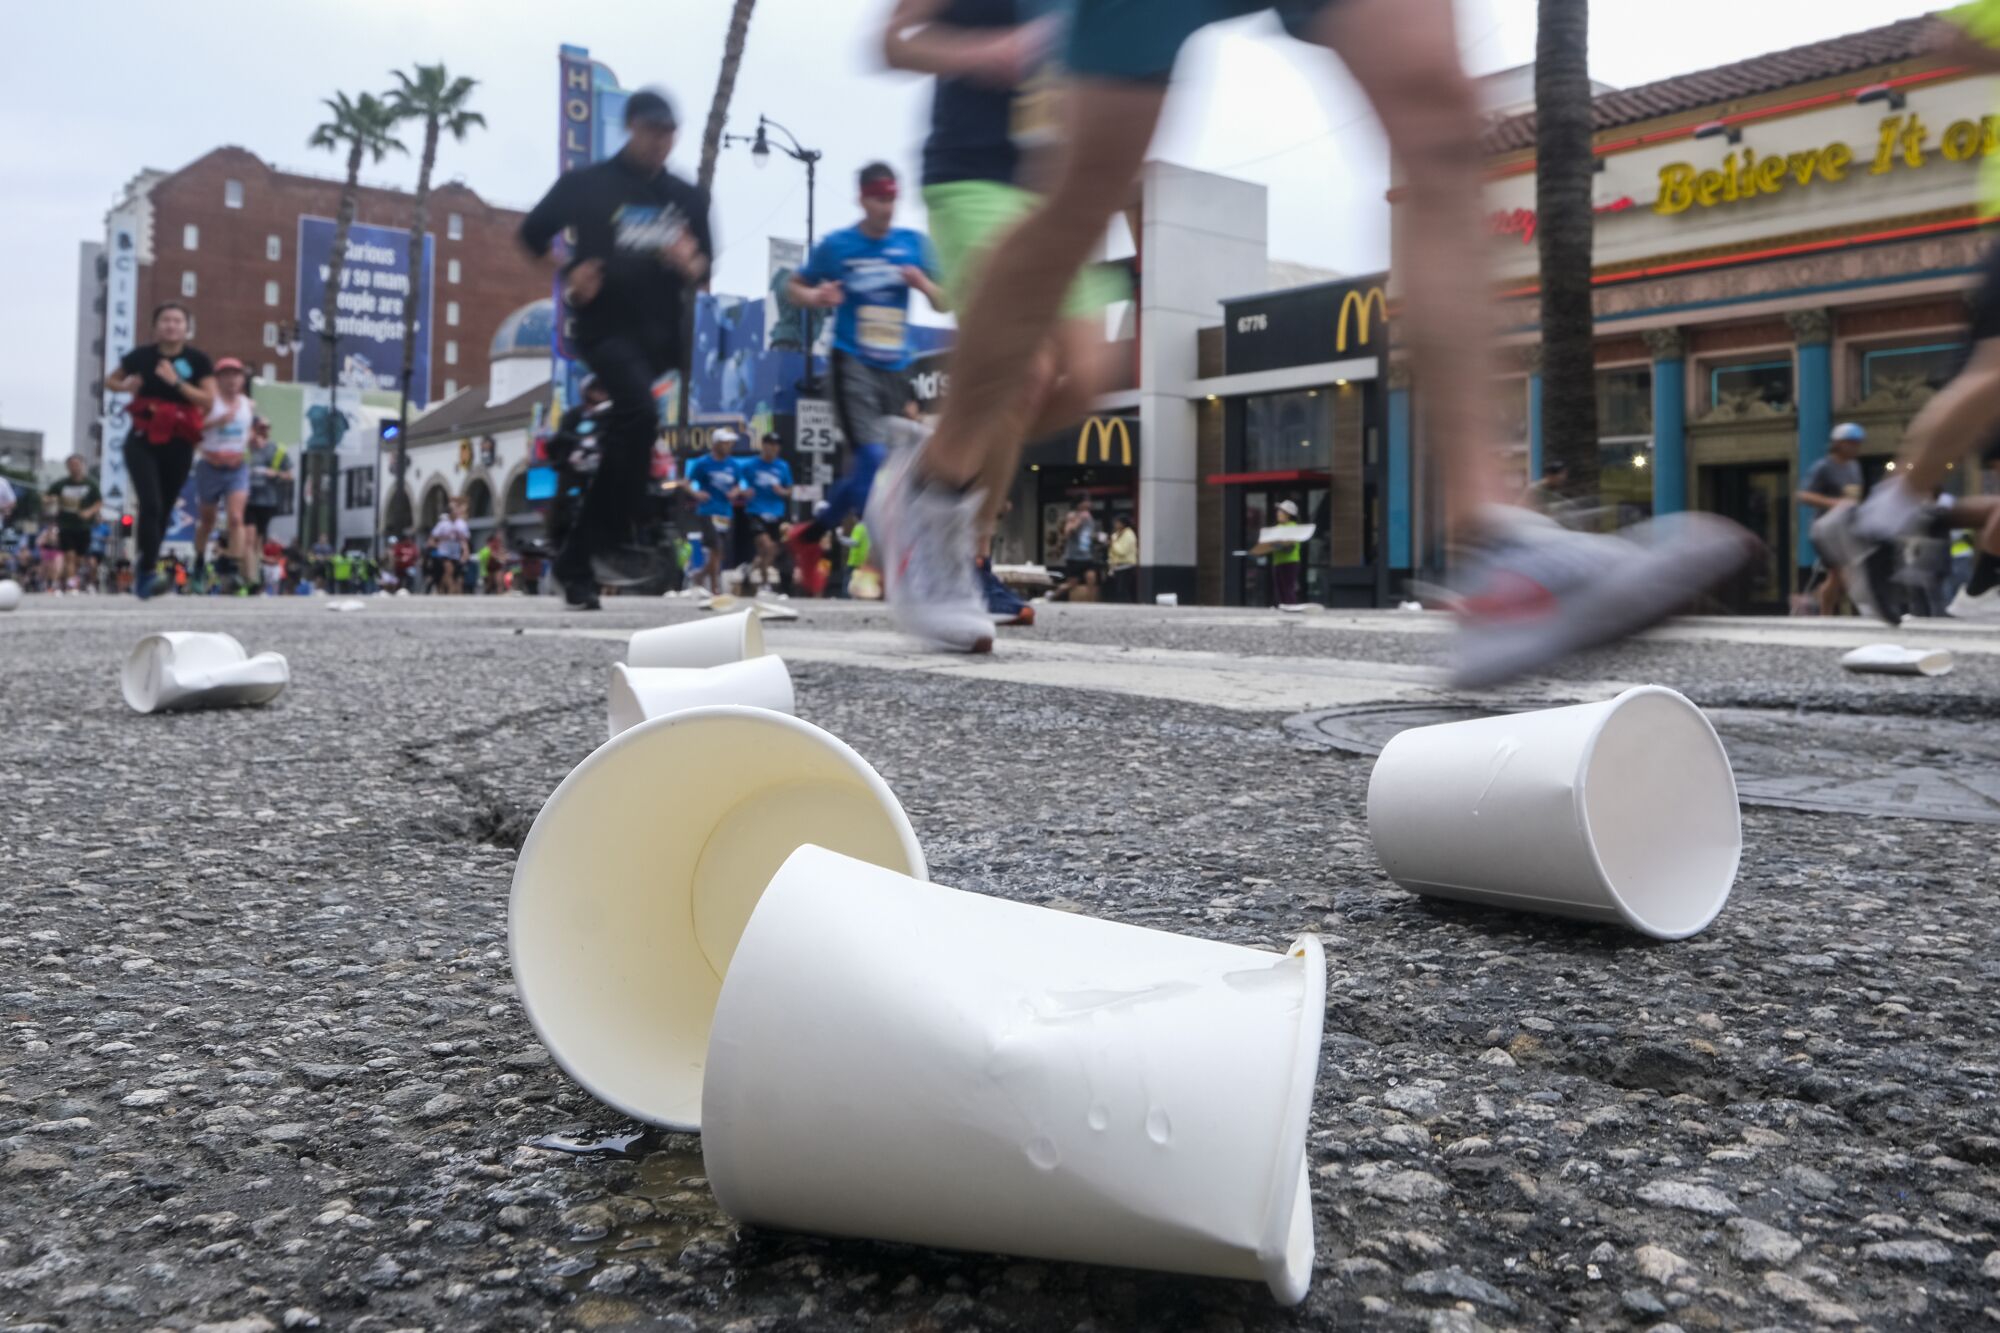 Cups of water littered the street as runners passed it.